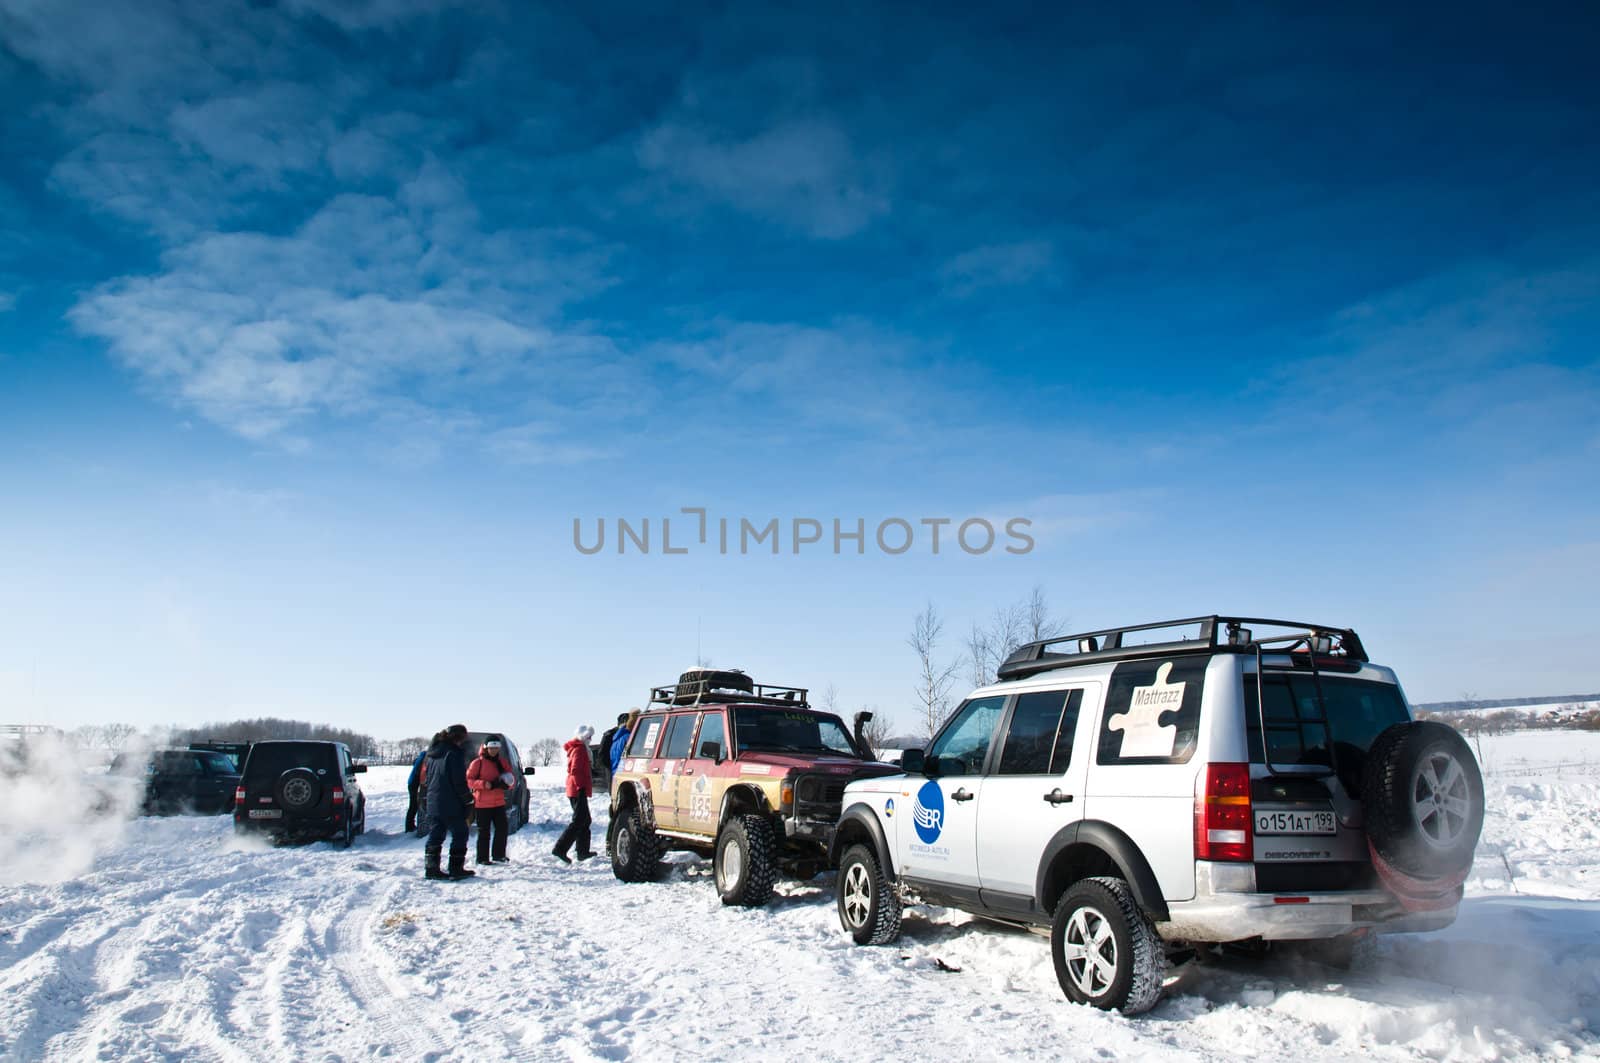 SUVs: Land Rover Discovery and Nissan Patrol
Car on background the Russian winter.
February 19, 2011. Mattrazz Trophy # 18